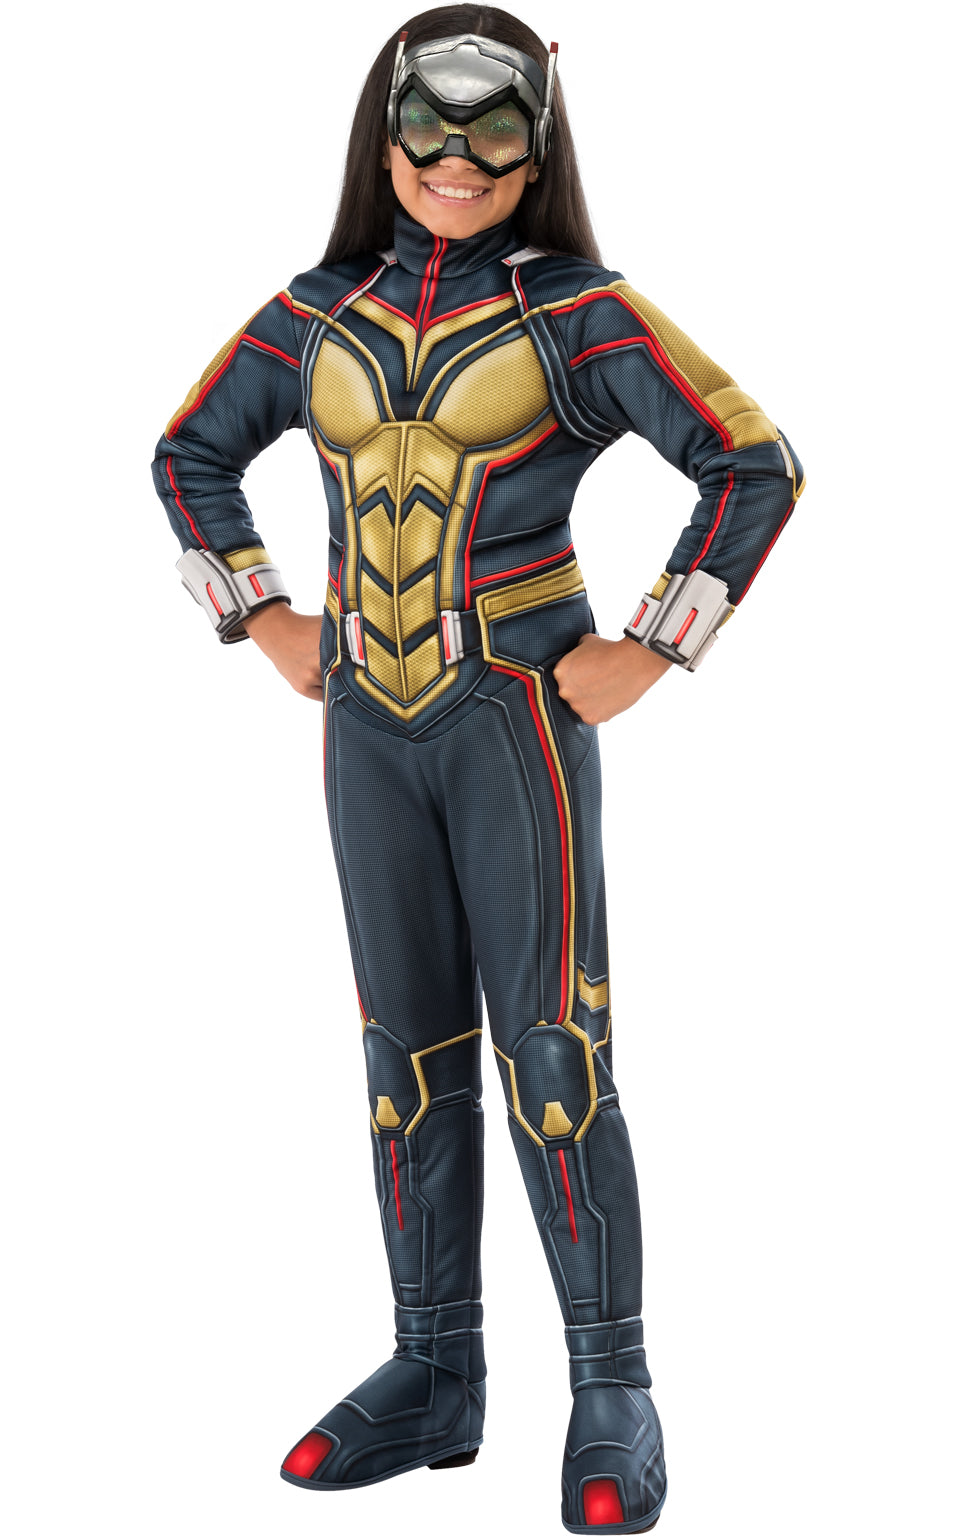 Girls Wasp costume includes a blue and gold jumpsuit and a Wasp mask will have your child looking just like the Wasp.